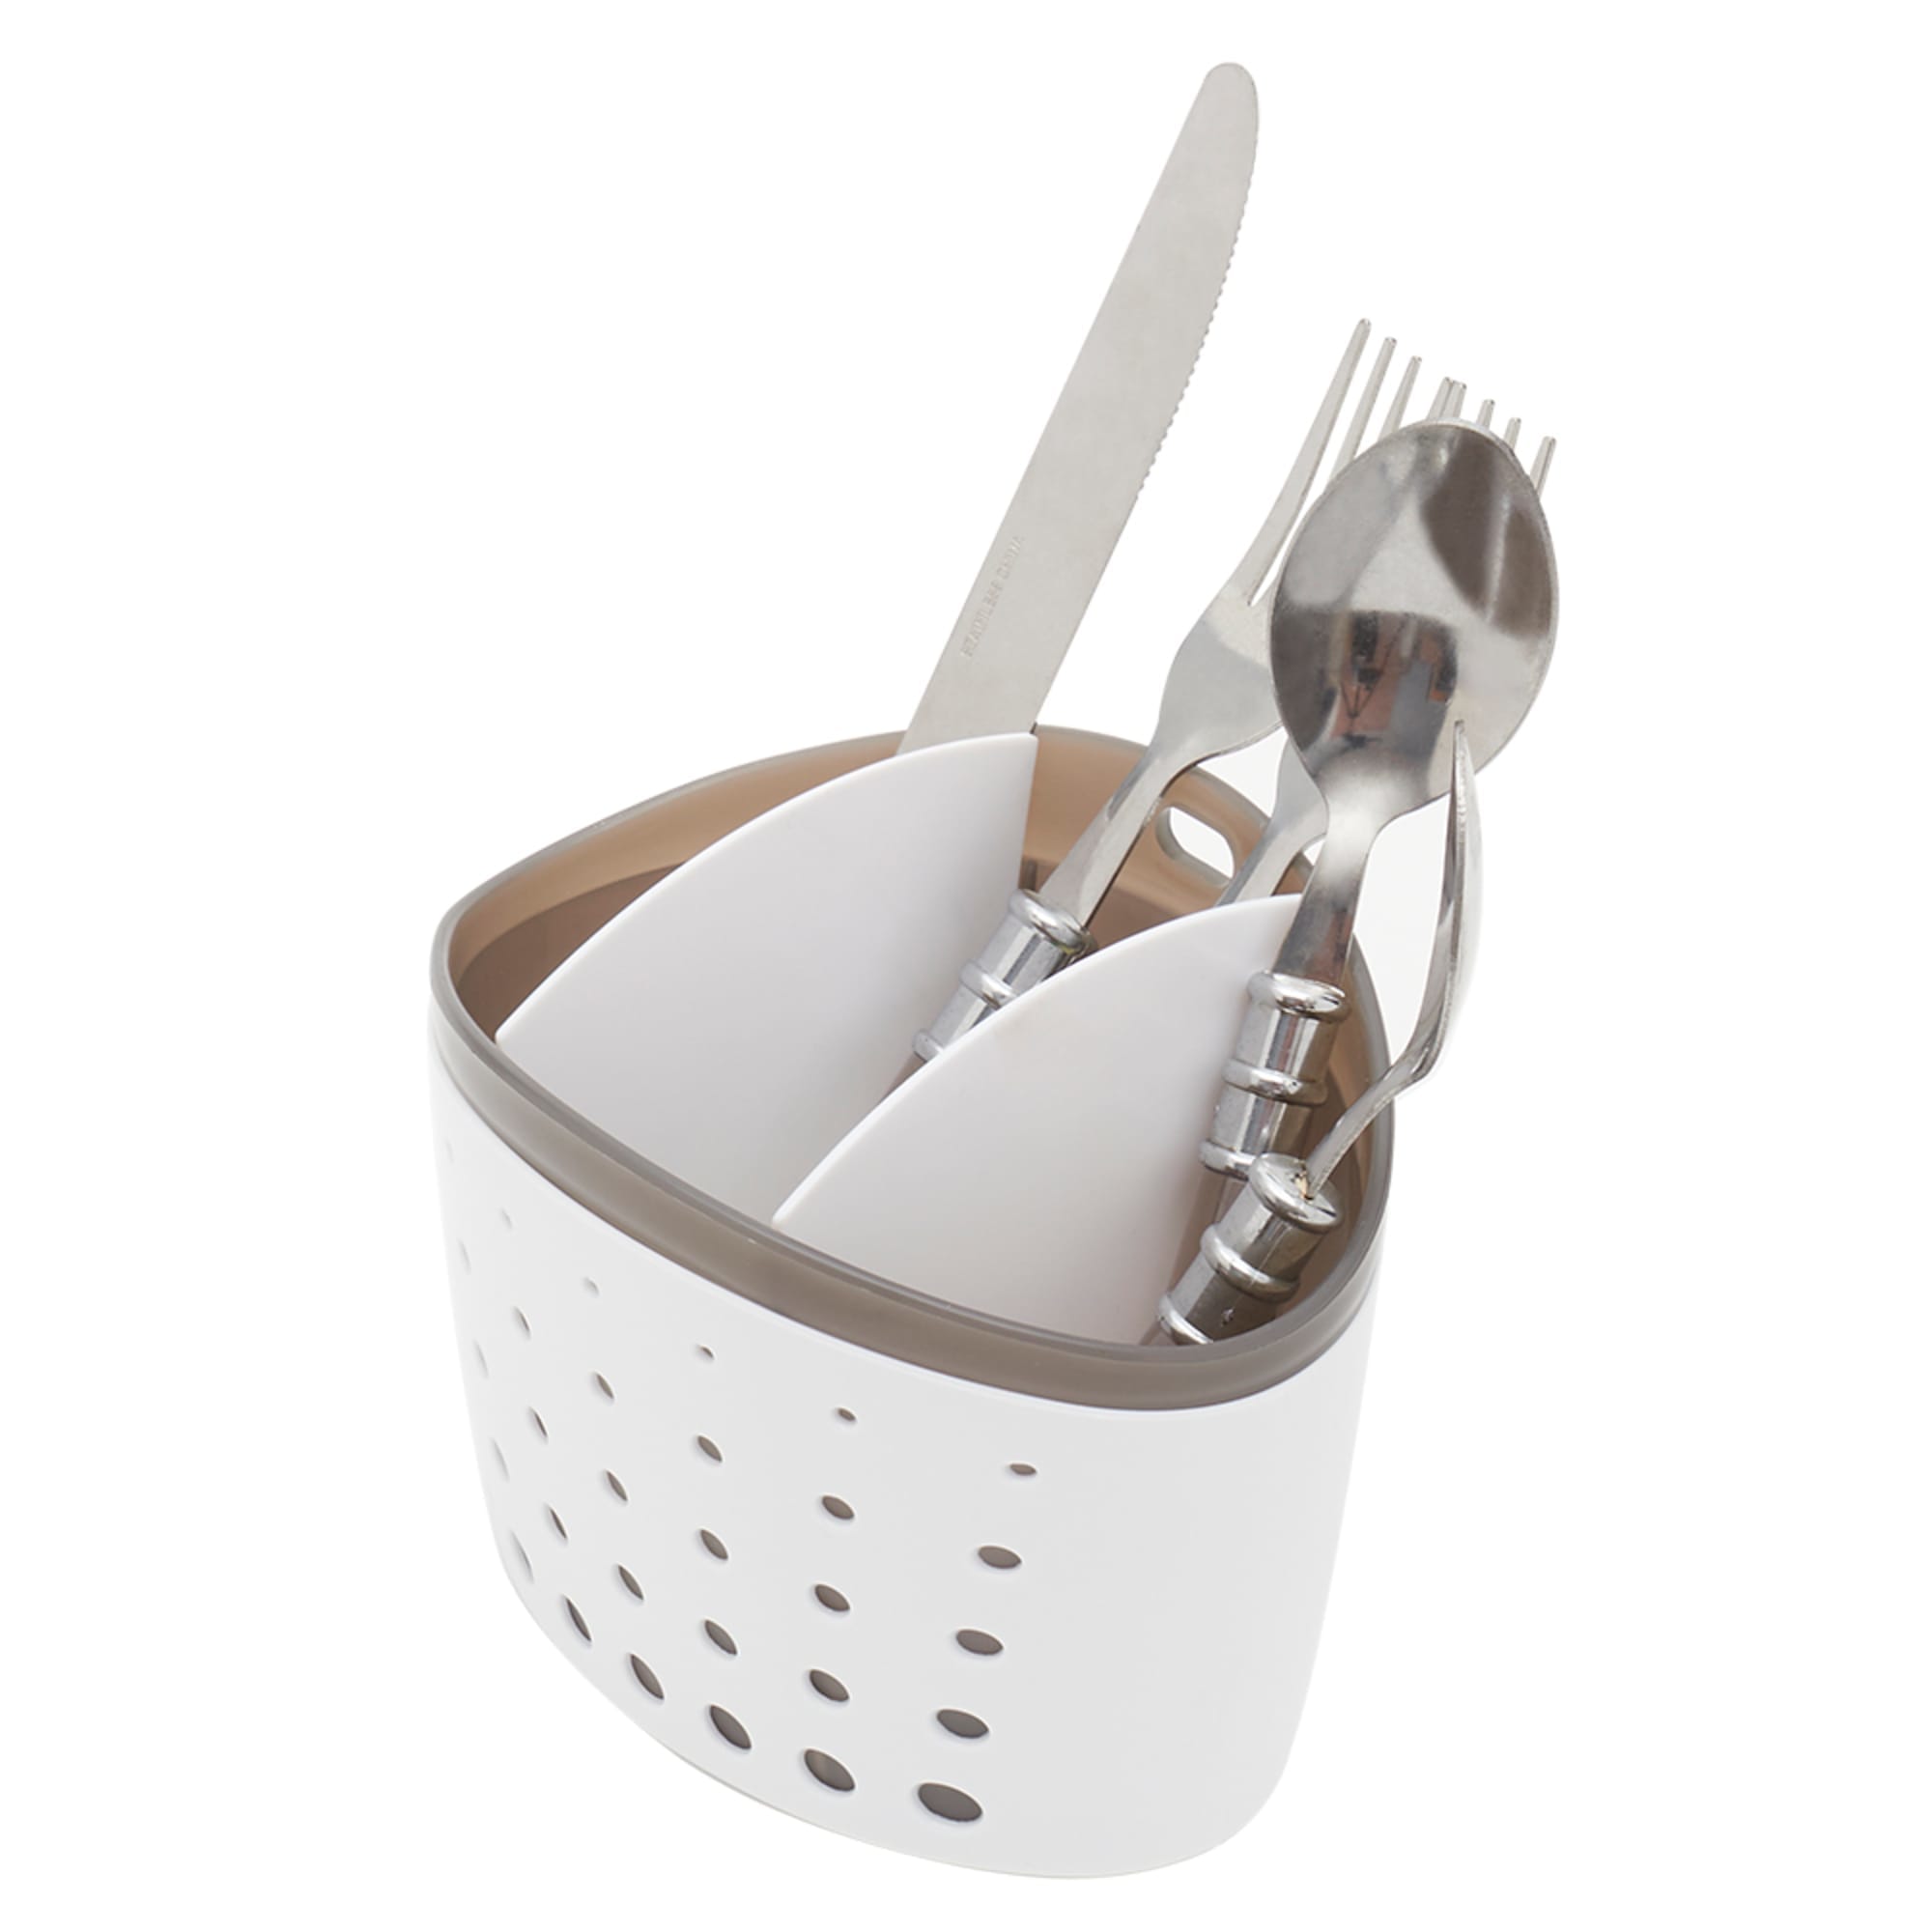 Home Basics 3 Section Perforated Plastic Cutlery Holder with Removable Inserts, White $2.50 EACH, CASE PACK OF 24